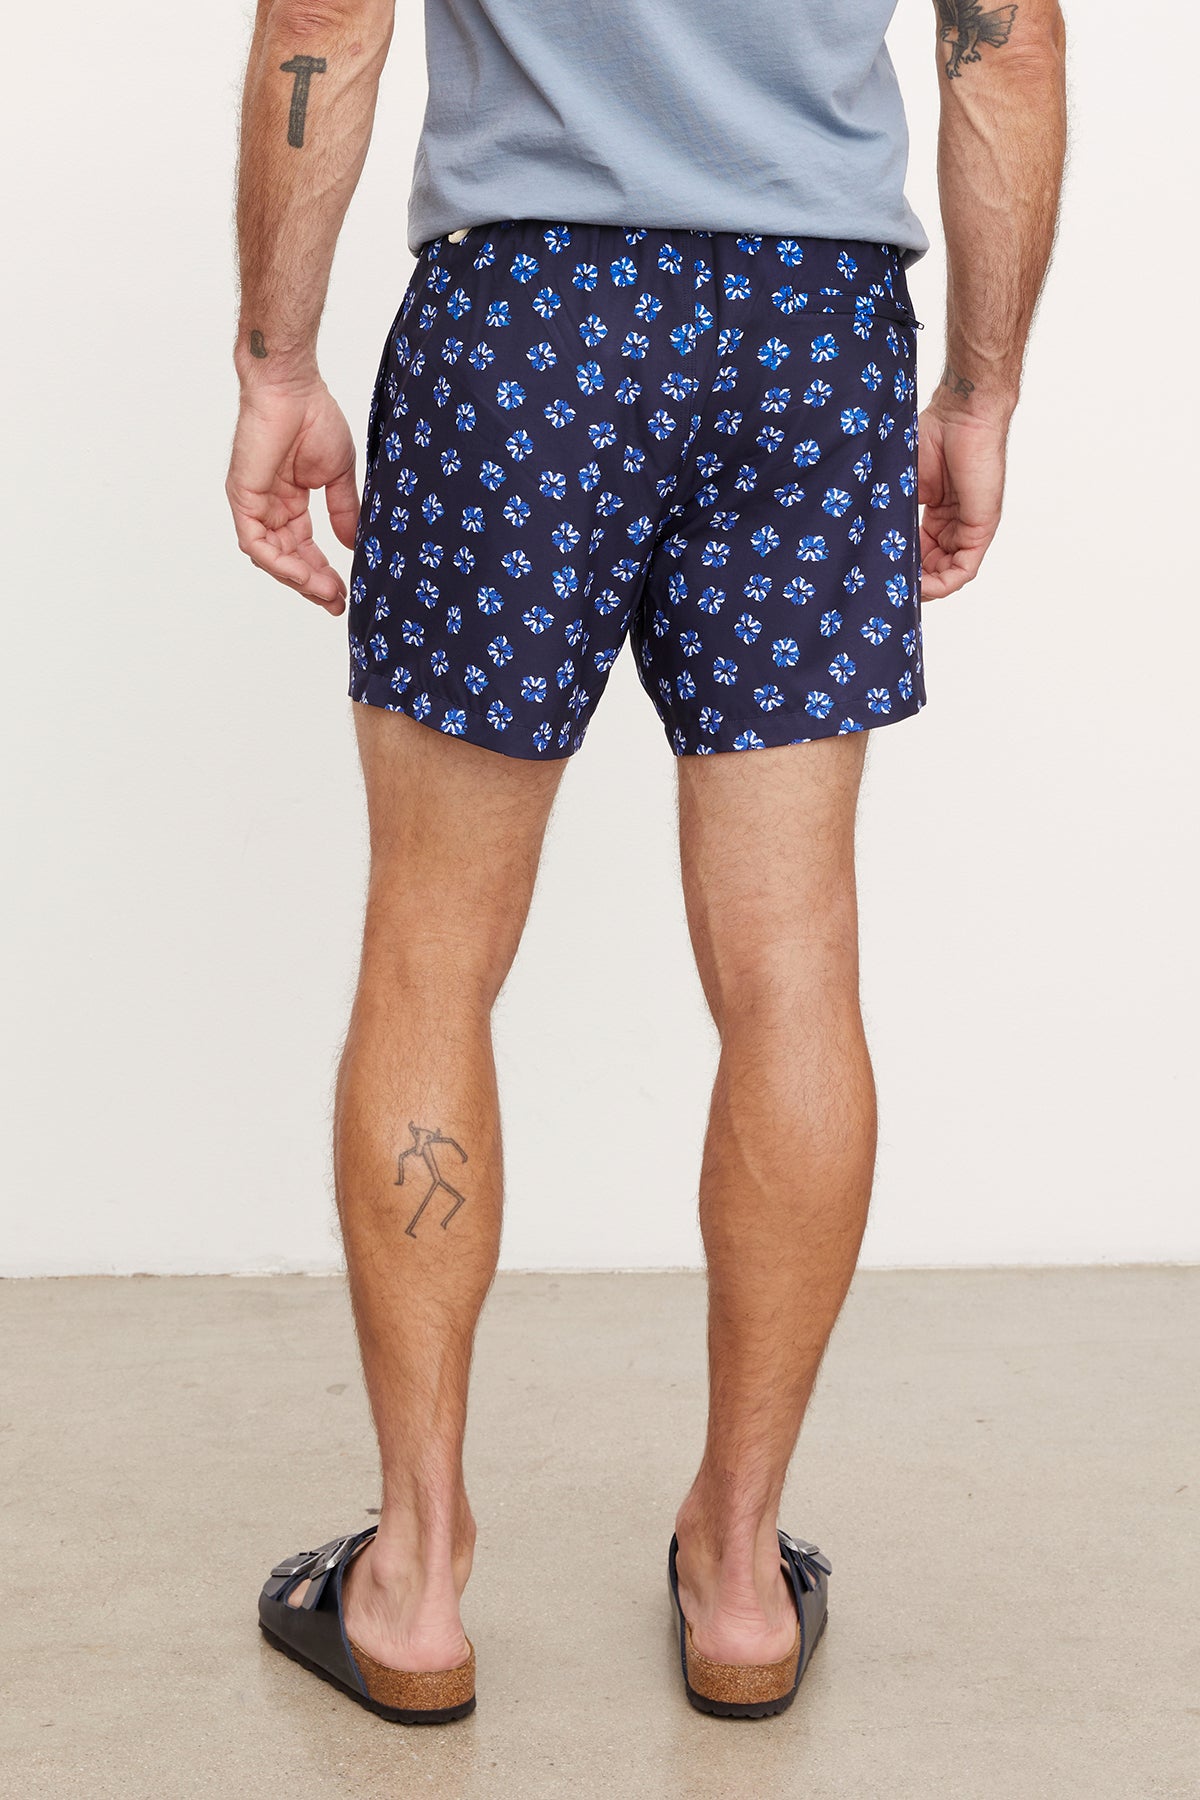 Man wearing Velvet by Graham & Spencer RICARDO SWIM SHORT swim shorts and black flip-flops, standing and showing the side and rear view, with visible tattoos on both arms and left leg.-36918541746369